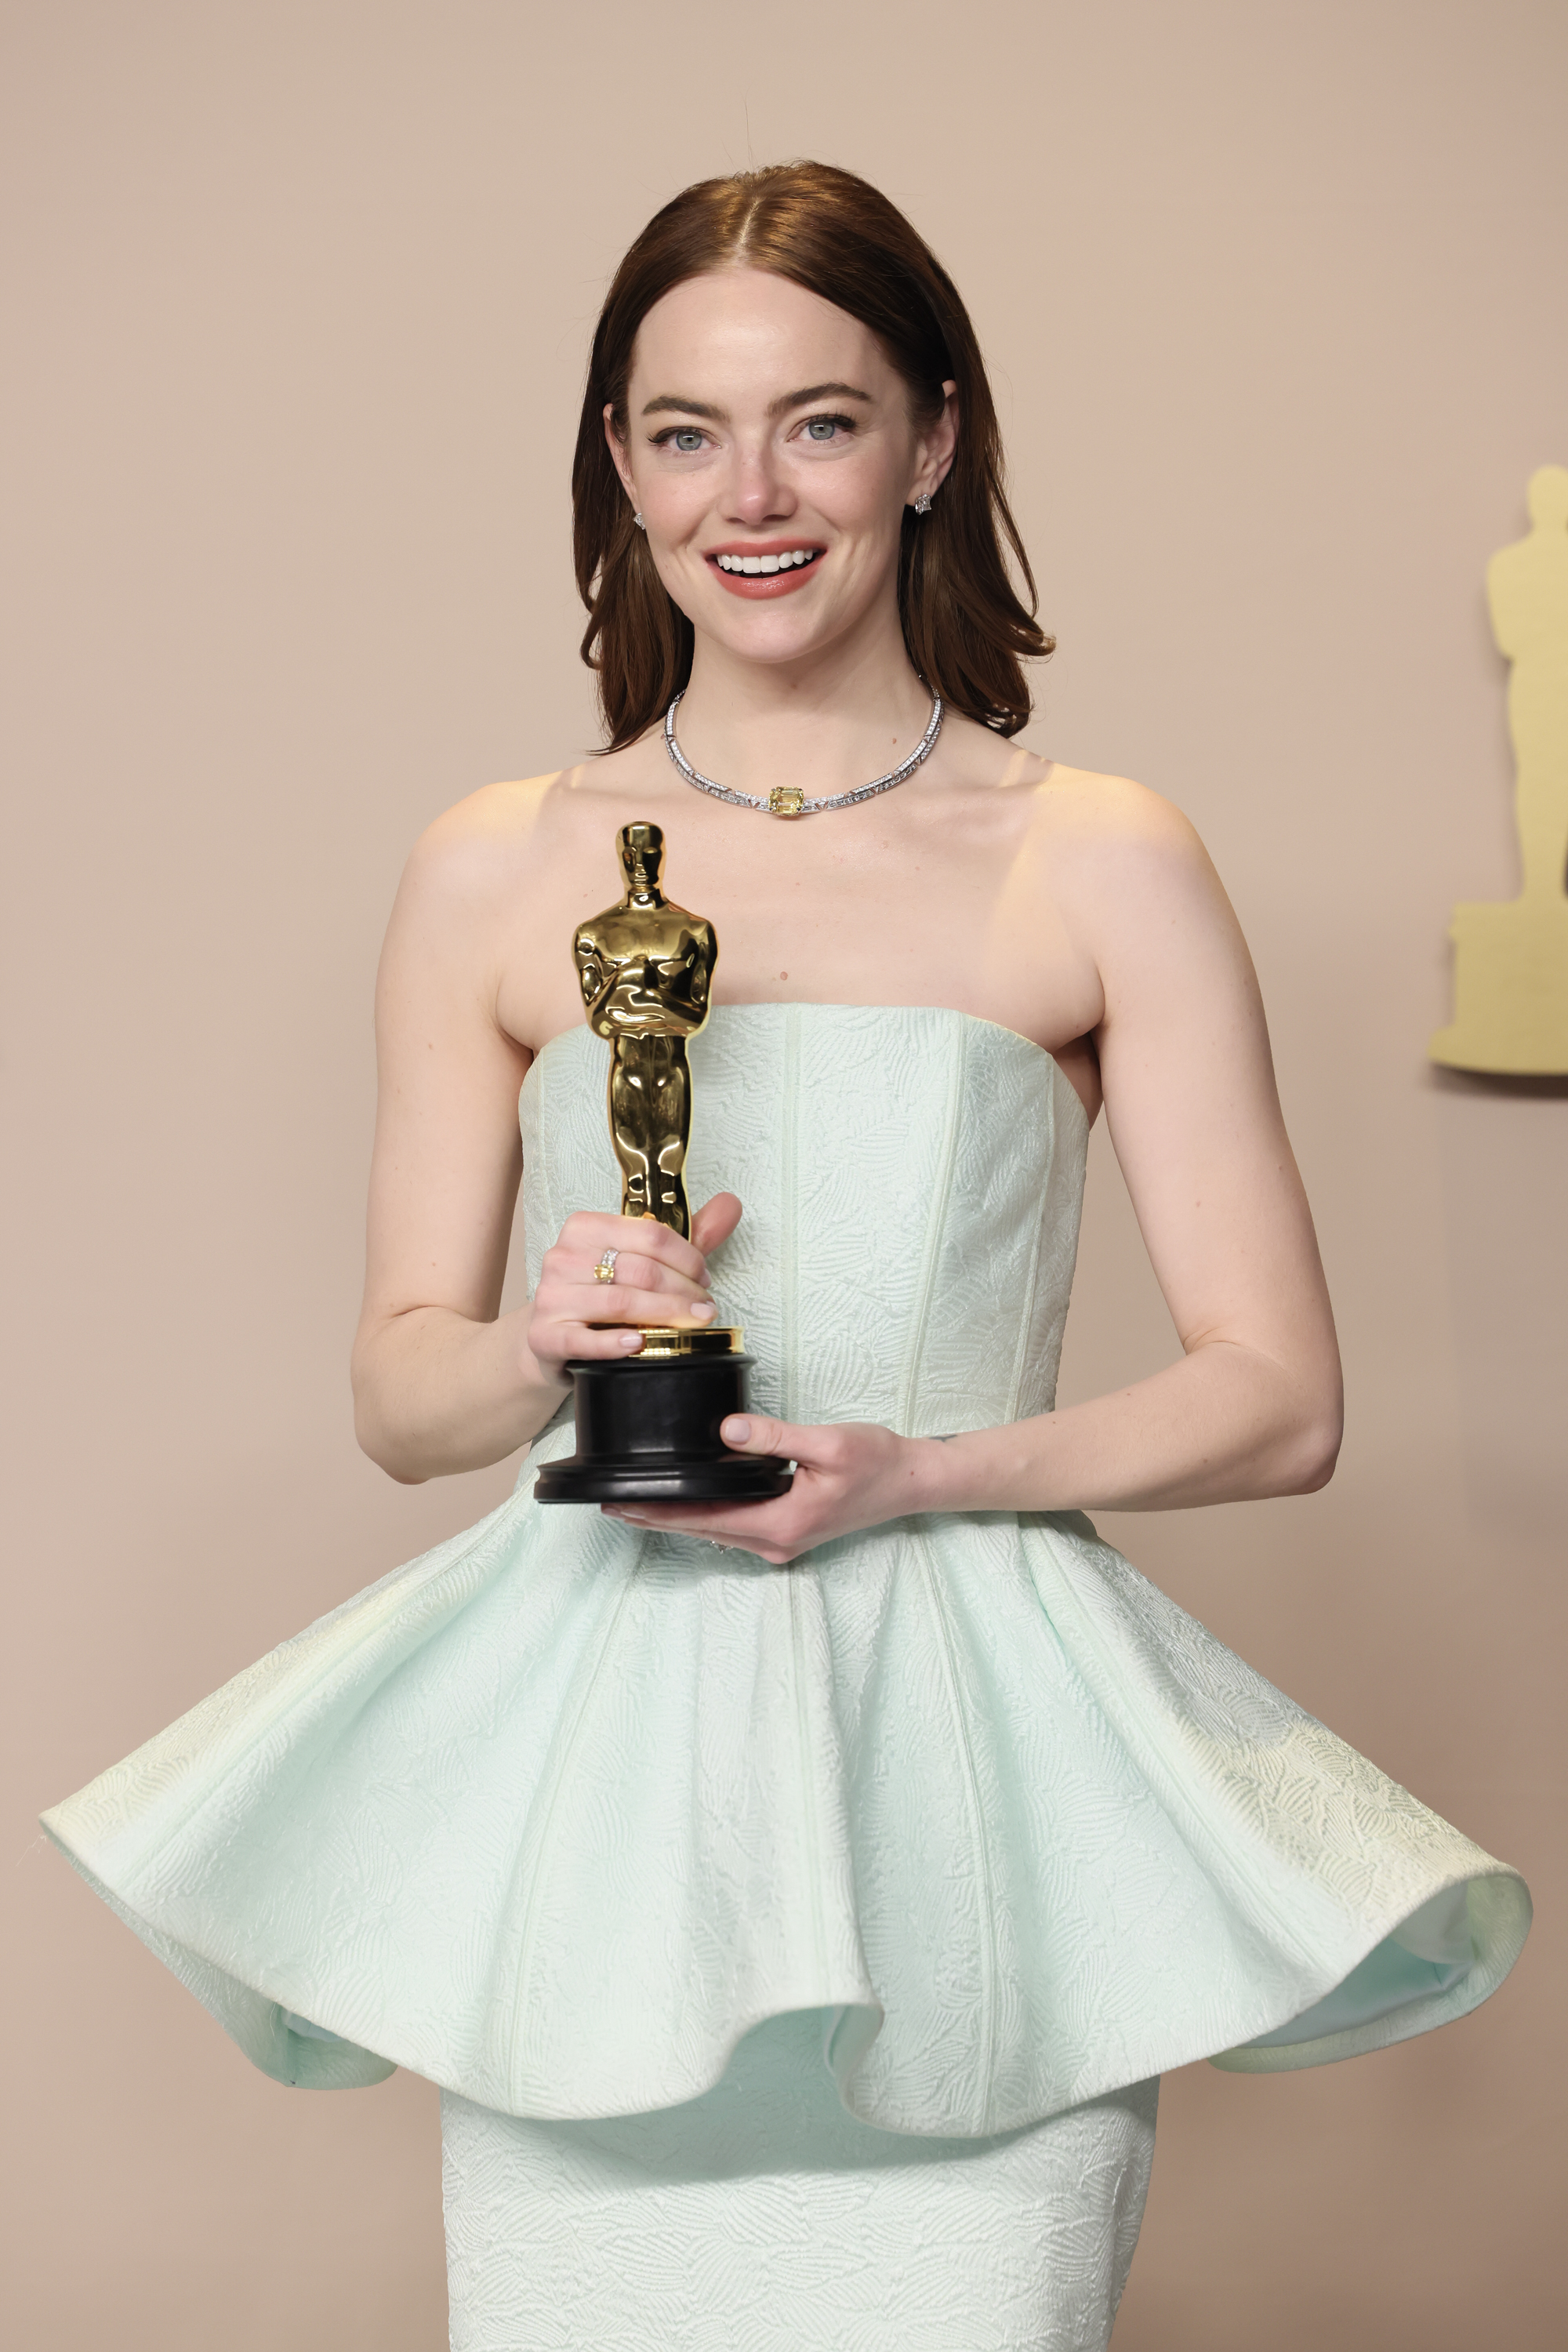 Emma Stone posing with an Oscar, wearing a strapless gown with a peplum waist